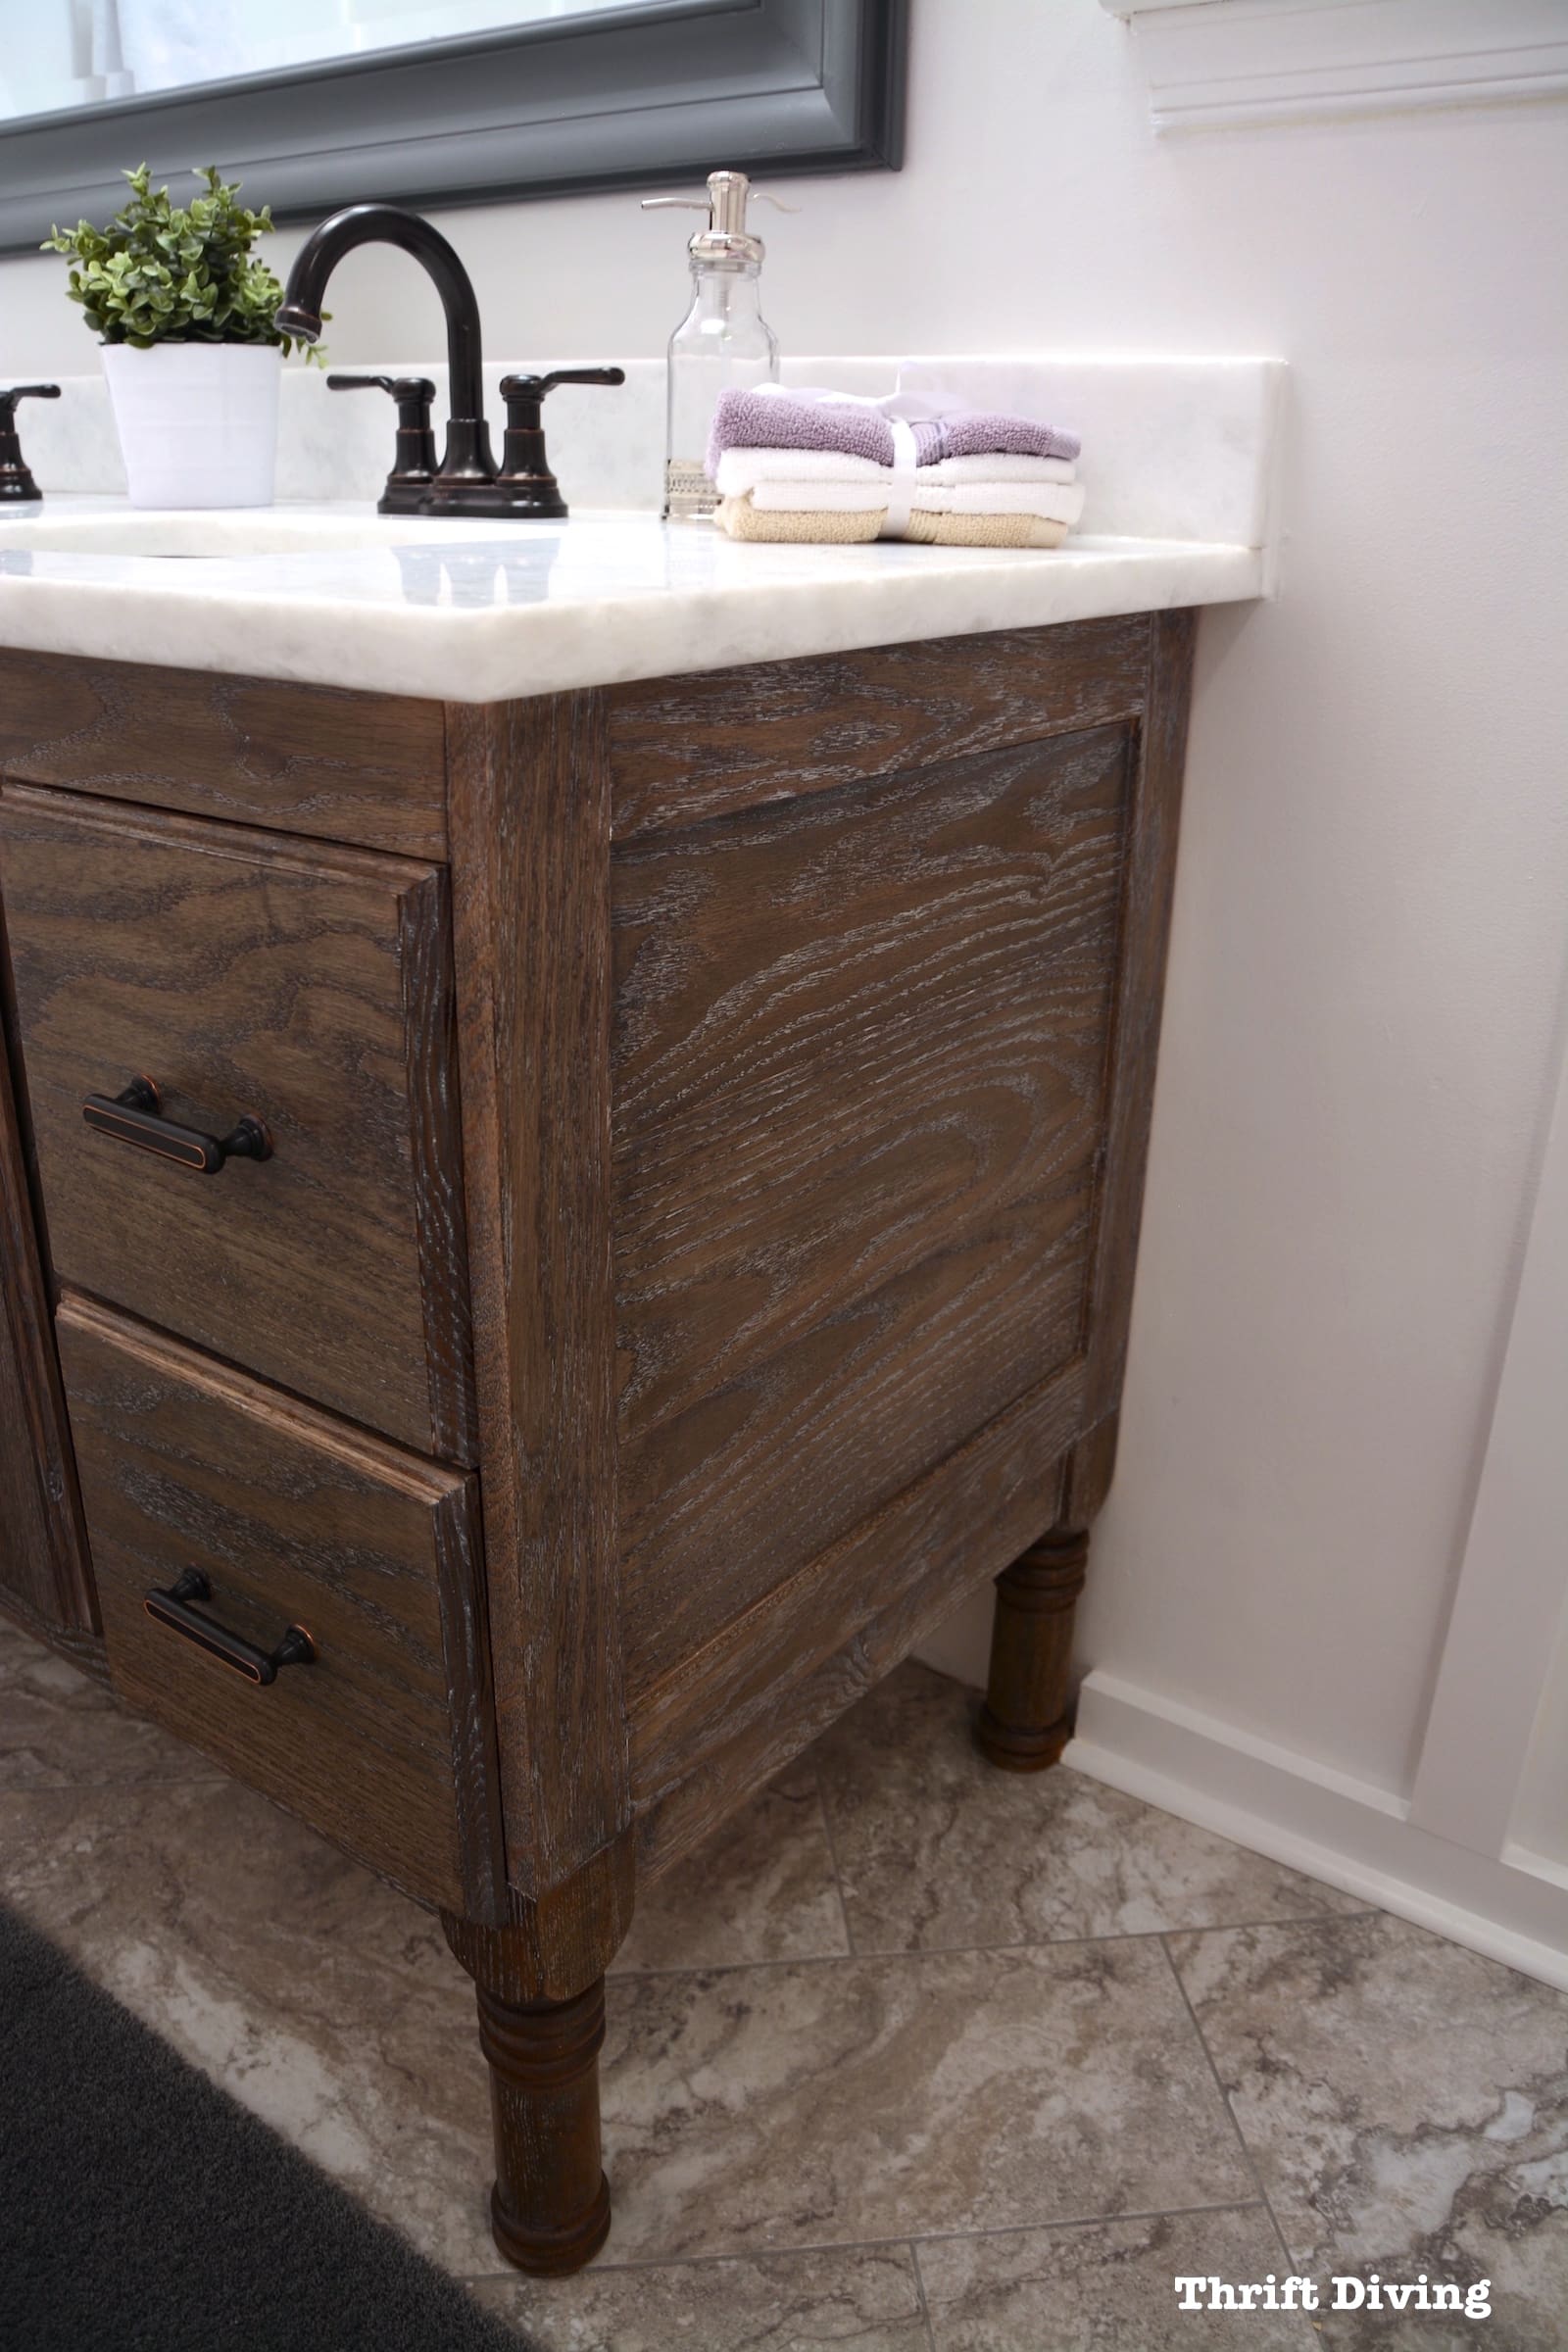 How To Build A 60 Diy Bathroom Vanity From Scratch - How To Build Bathroom Vanity Base